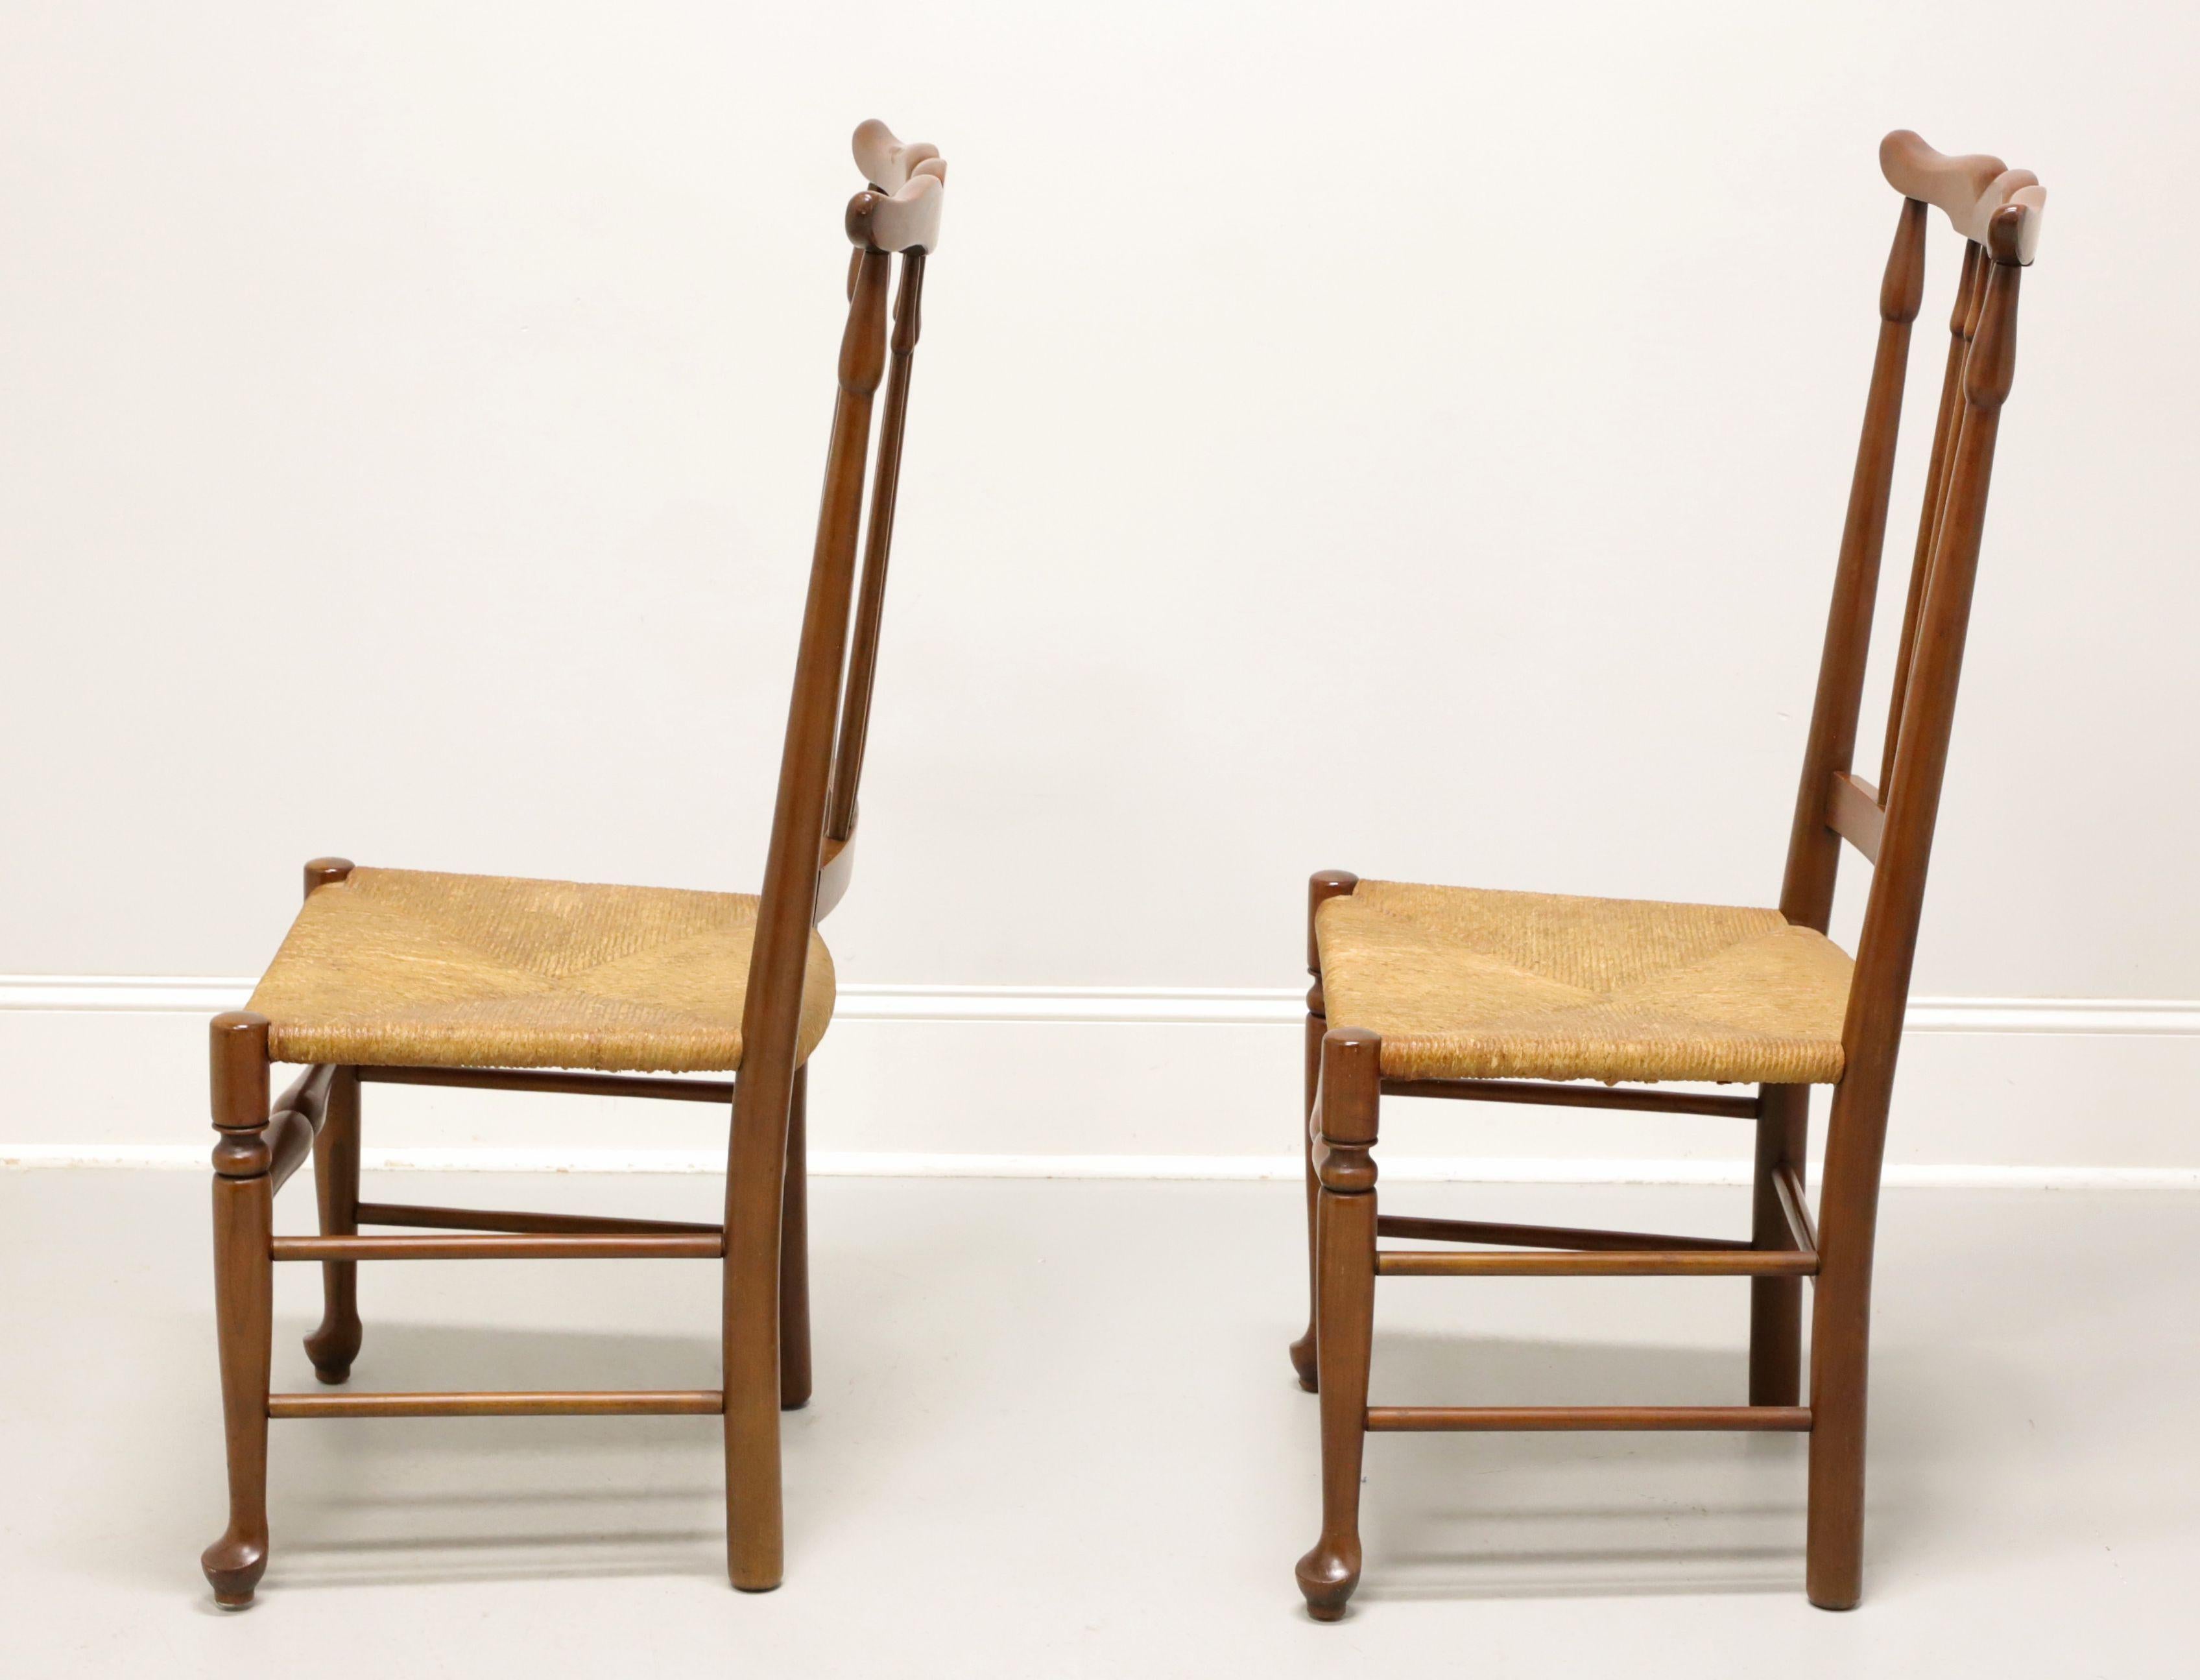 Mid 20th Century Cherry Farmhouse Dining Side Chairs with Rush Seats - Pair B In Good Condition For Sale In Charlotte, NC